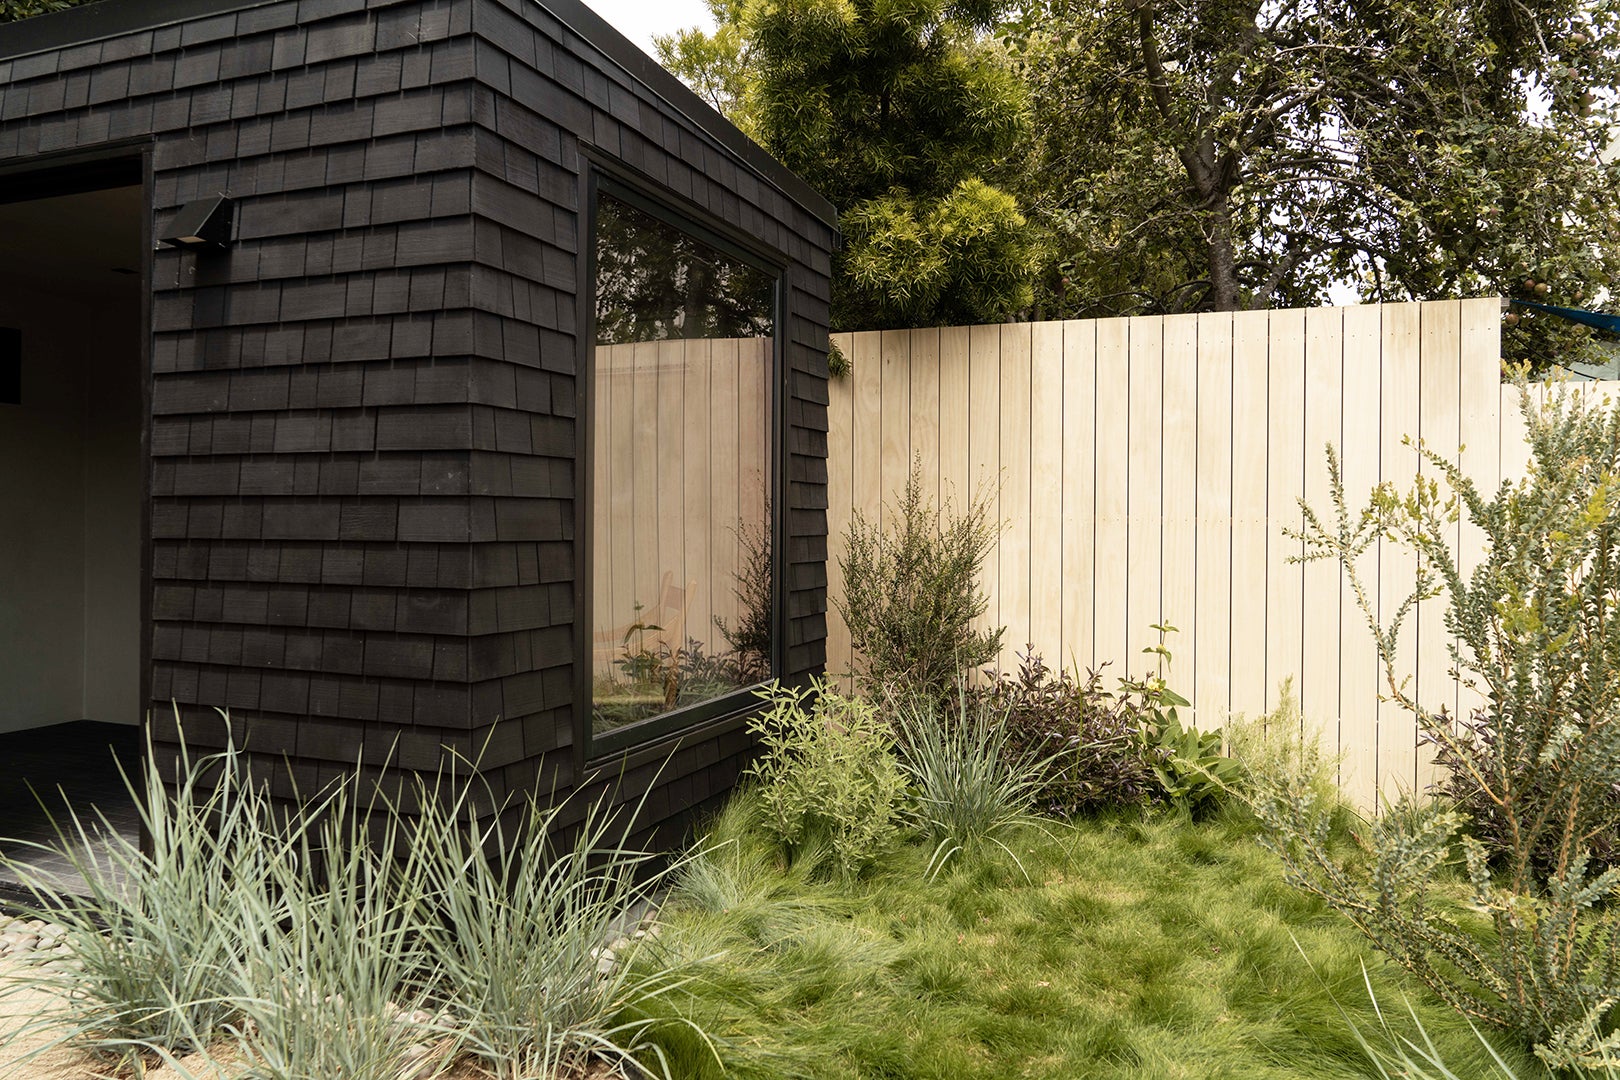 How to Maximize a Hilly San Francisco Backyard: A Winding Wood Staircase